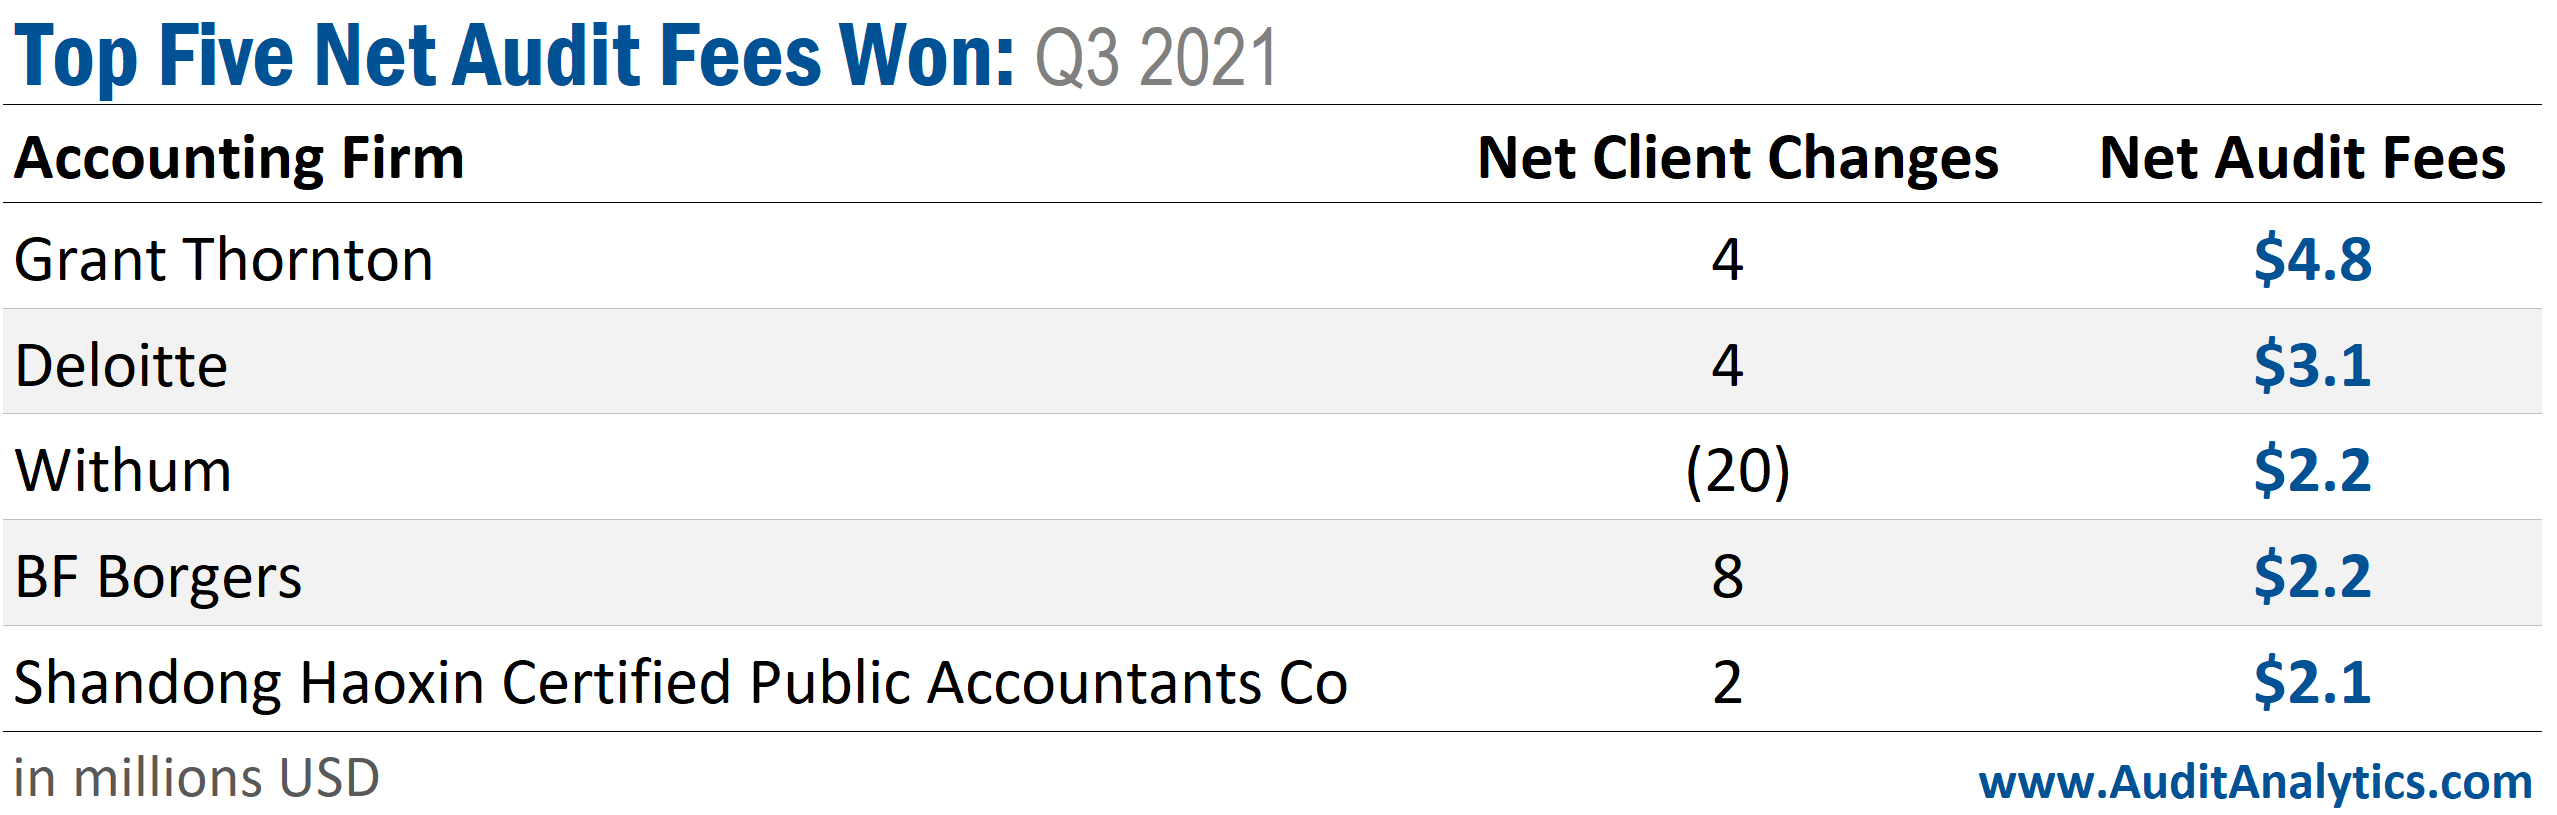 Net audit fees gained from client engagements resulting from auditor changes in Q3 2021